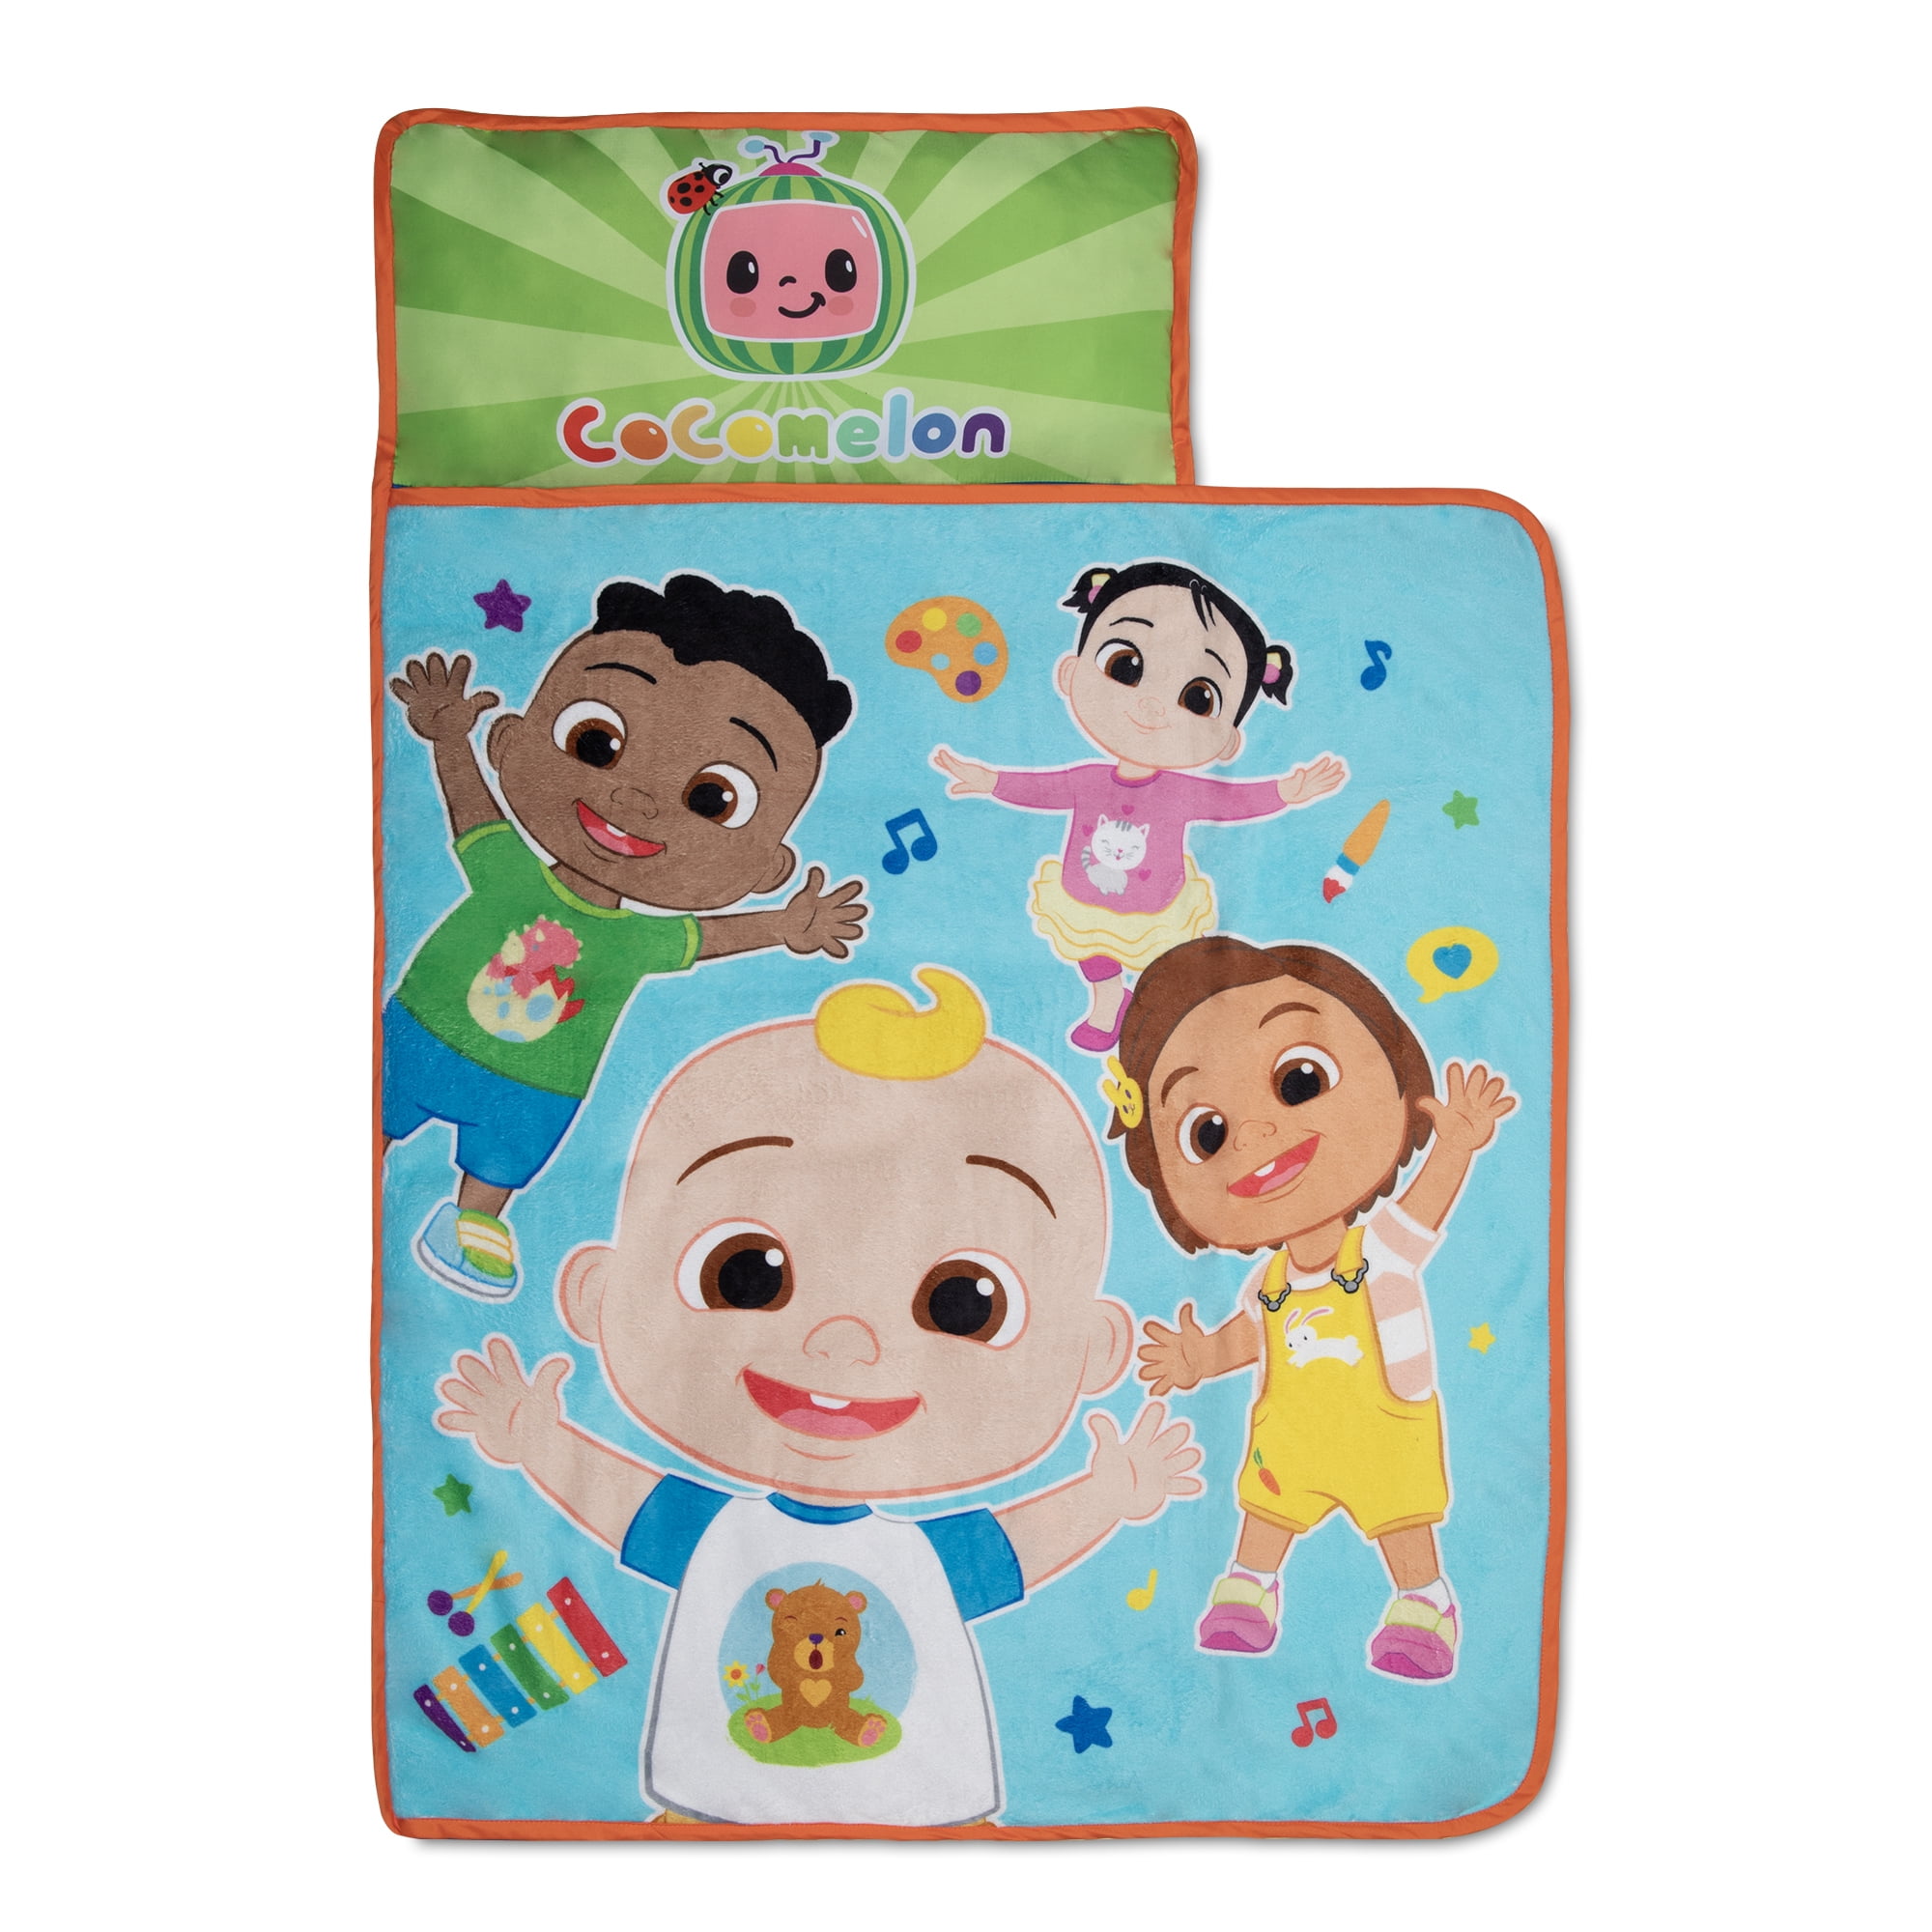 CoComelon "JJ Playtime" Toddler Nap Mat, JJ, Cody, and Friends, Blue